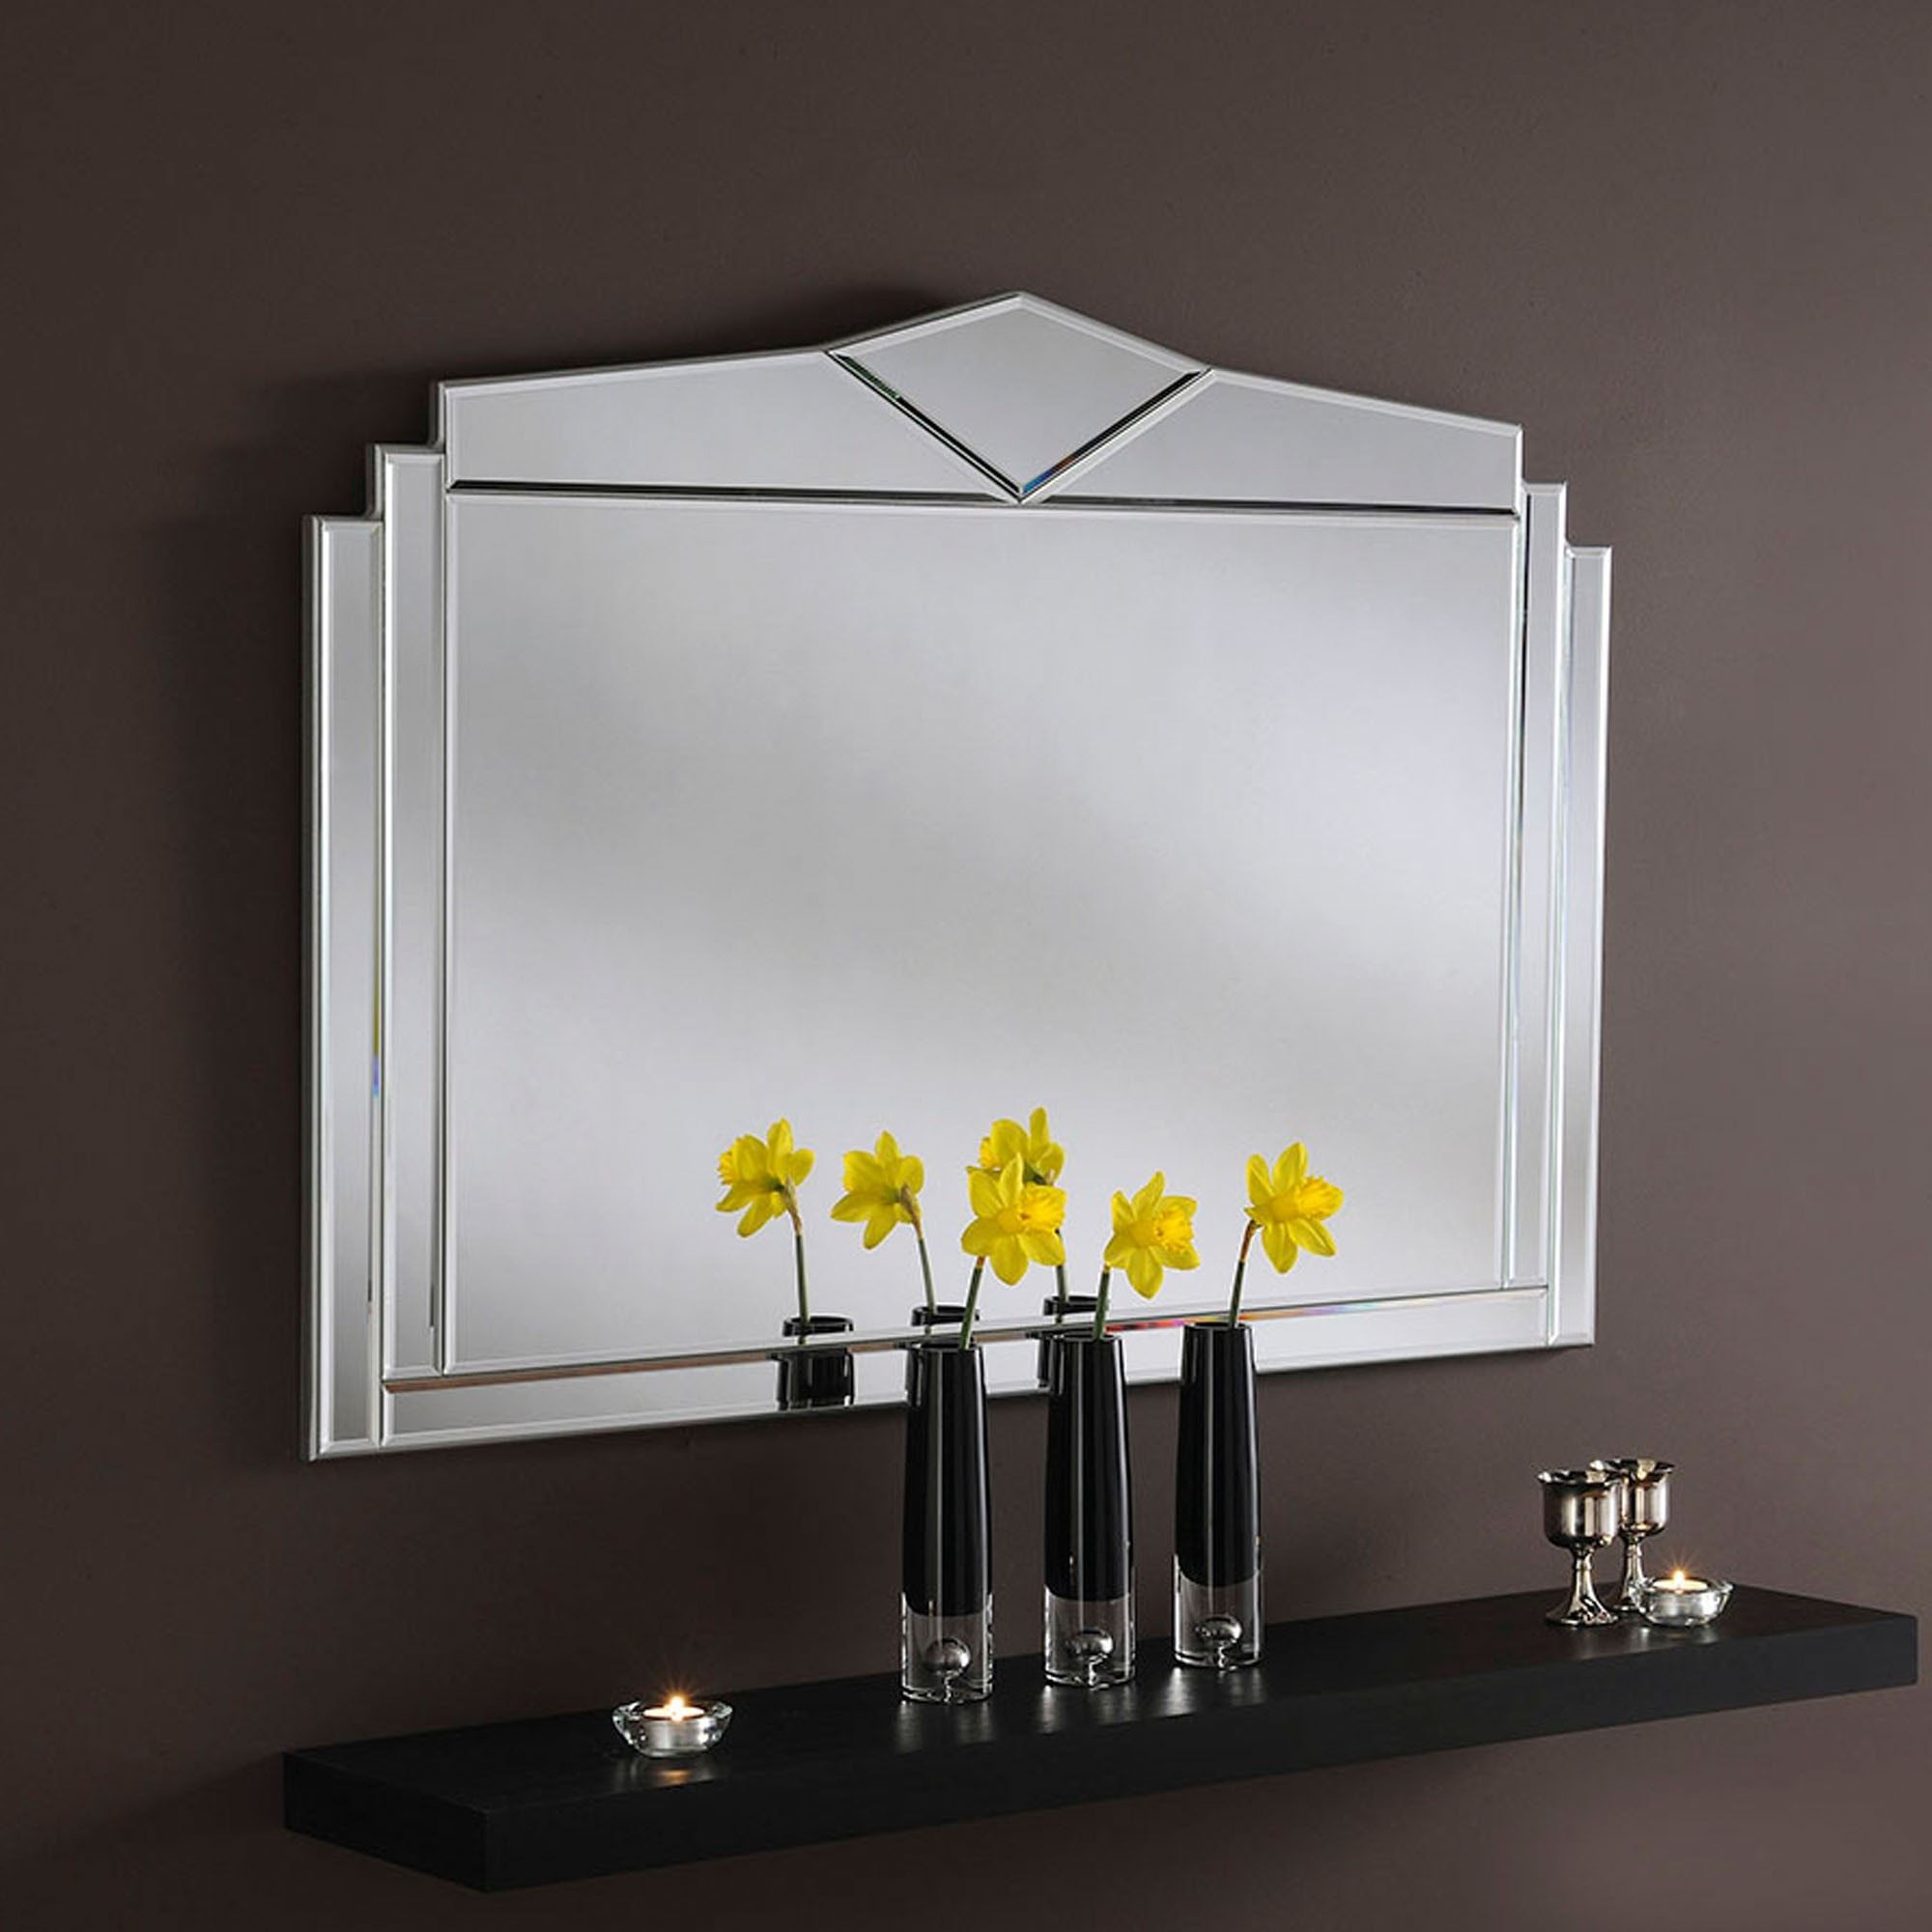 Decorative Art Deco Silver Wall Mirror | Wall Mirrors Throughout Silver Metal Cut Edge Wall Mirrors (View 7 of 15)